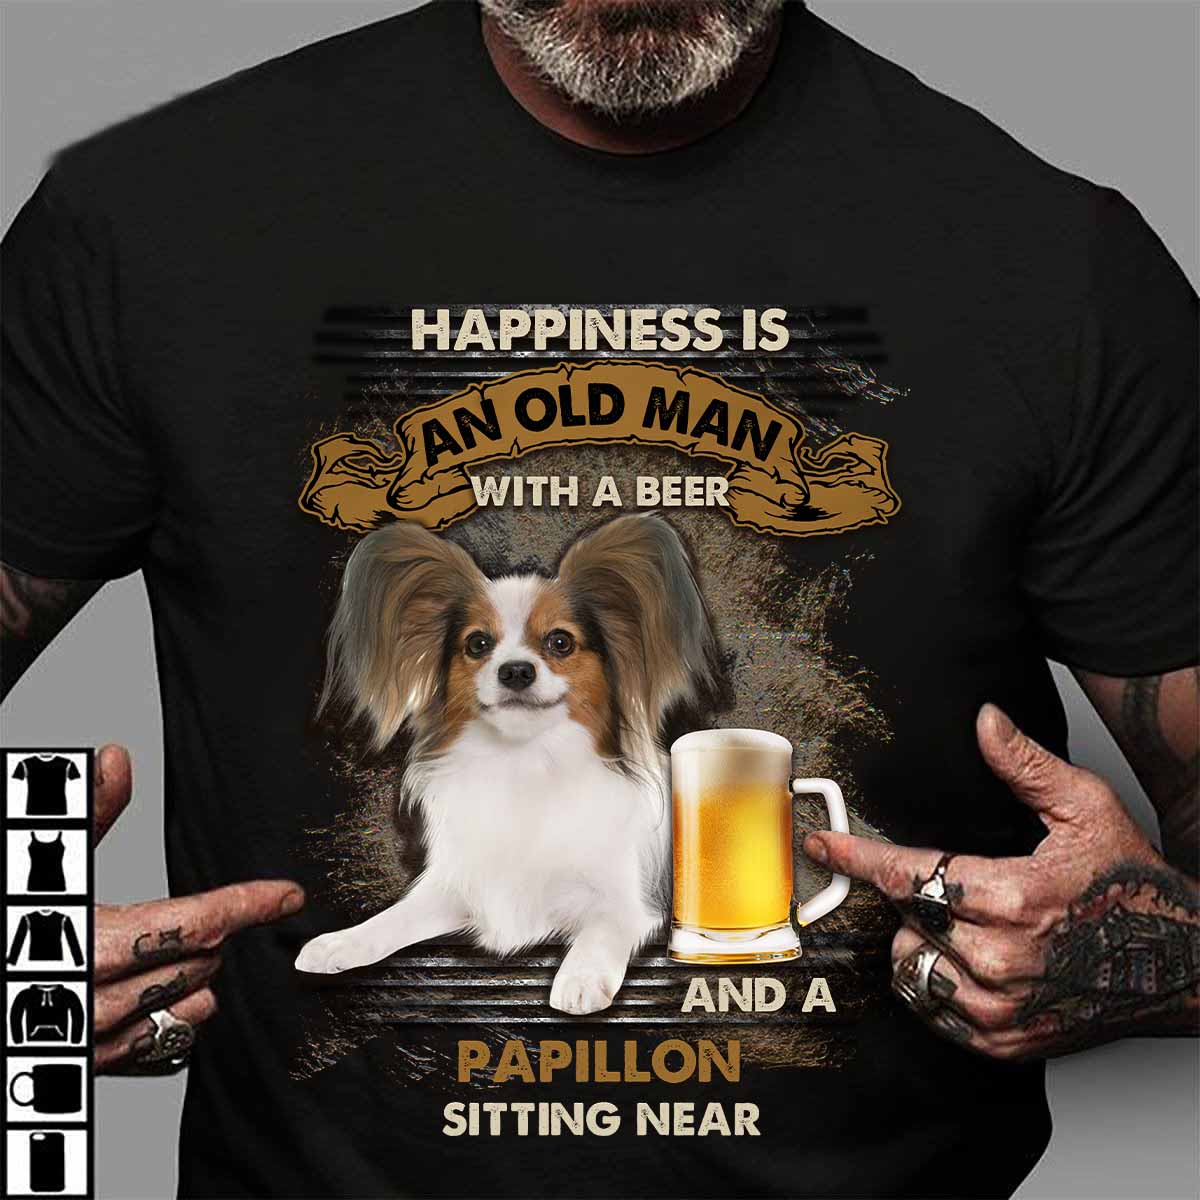 Happiness is an old man with a beer and a Papillon sitting near - Beer and dog